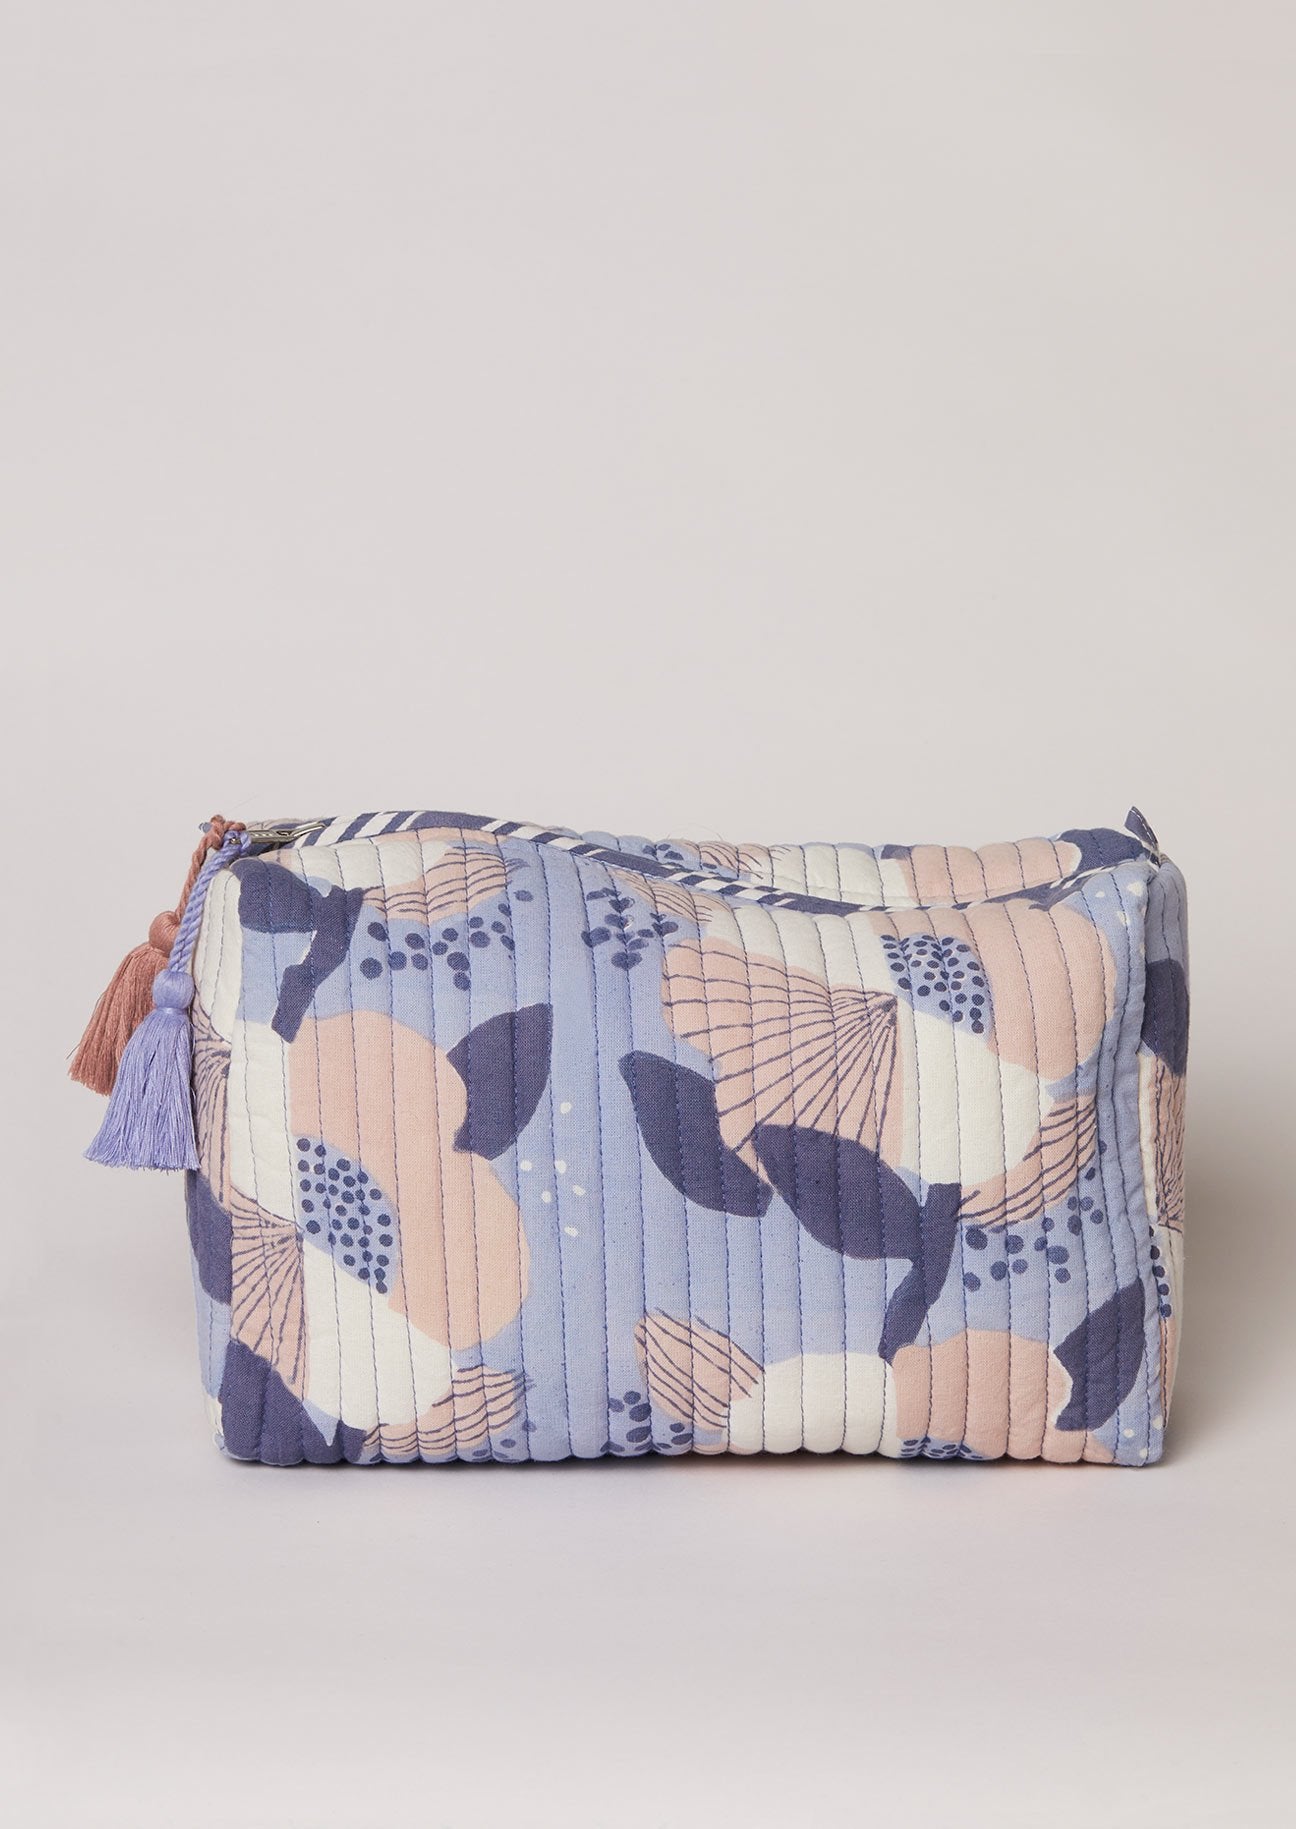 Blue wash bag with pink and white block-printed flowers and tassel detail.